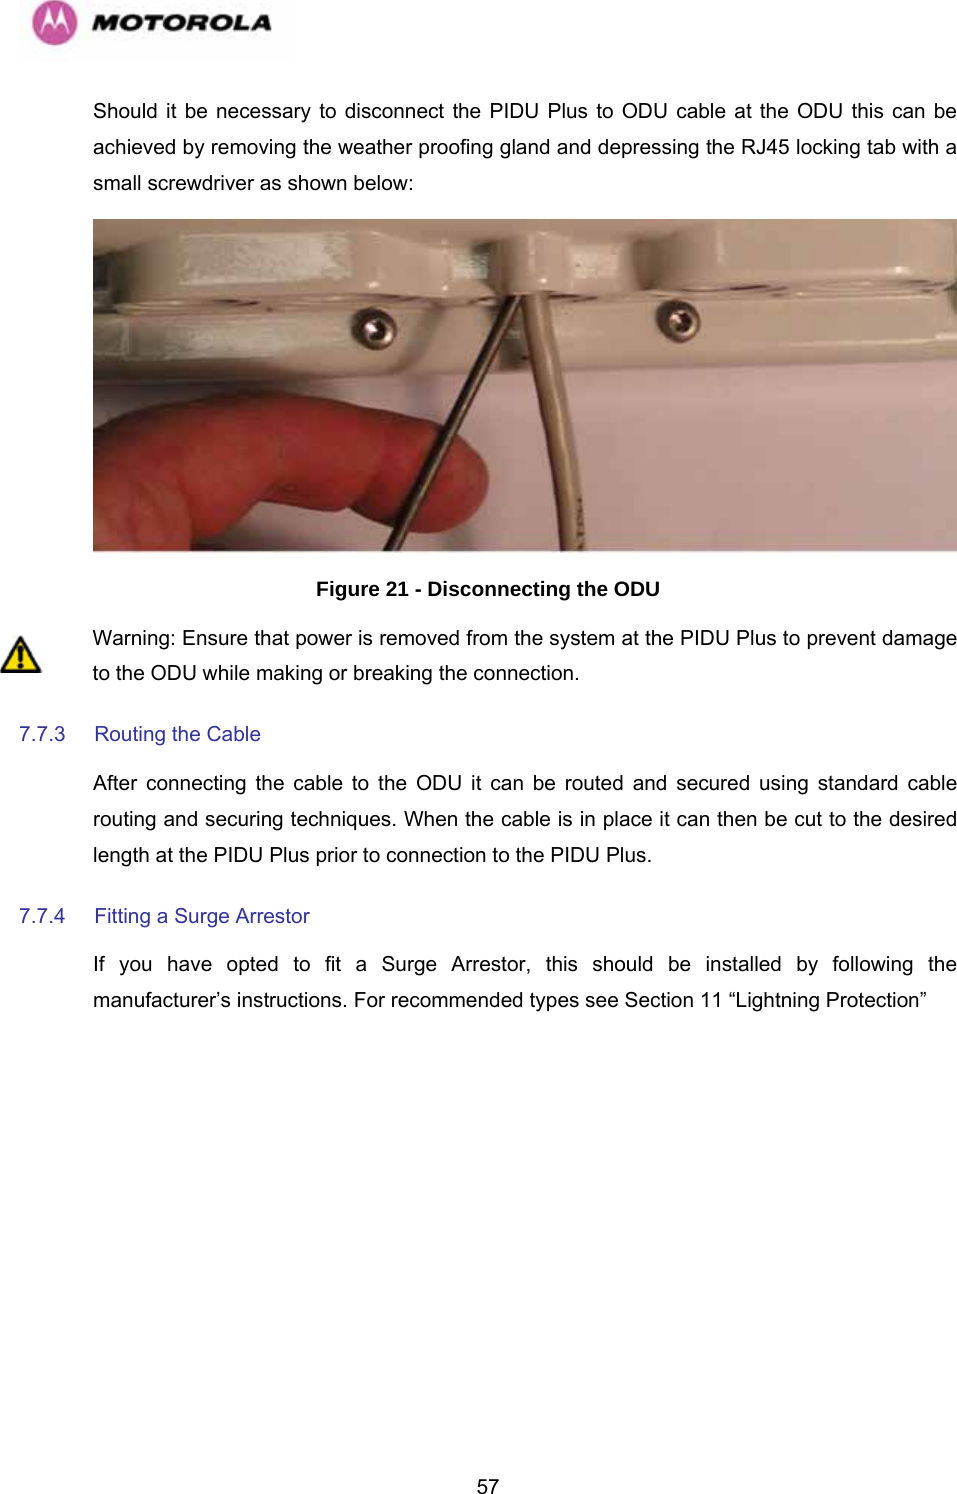   57Should it be necessary to disconnect the PIDU Plus to ODU cable at the ODU this can be achieved by removing the weather proofing gland and depressing the RJ45 locking tab with a small screwdriver as shown below:   Figure 21 - Disconnecting the ODU Warning: Ensure that power is removed from the system at the PIDU Plus to prevent damage to the ODU while making or breaking the connection. 7.7.3  Routing the Cable  After connecting the cable to the ODU it can be routed and secured using standard cable routing and securing techniques. When the cable is in place it can then be cut to the desired length at the PIDU Plus prior to connection to the PIDU Plus. 7.7.4  Fitting a Surge Arrestor  If you have opted to fit a Surge Arrestor, this should be installed by following the manufacturer’s instructions. For recommended types see Section 11 “Lightning Protection” 